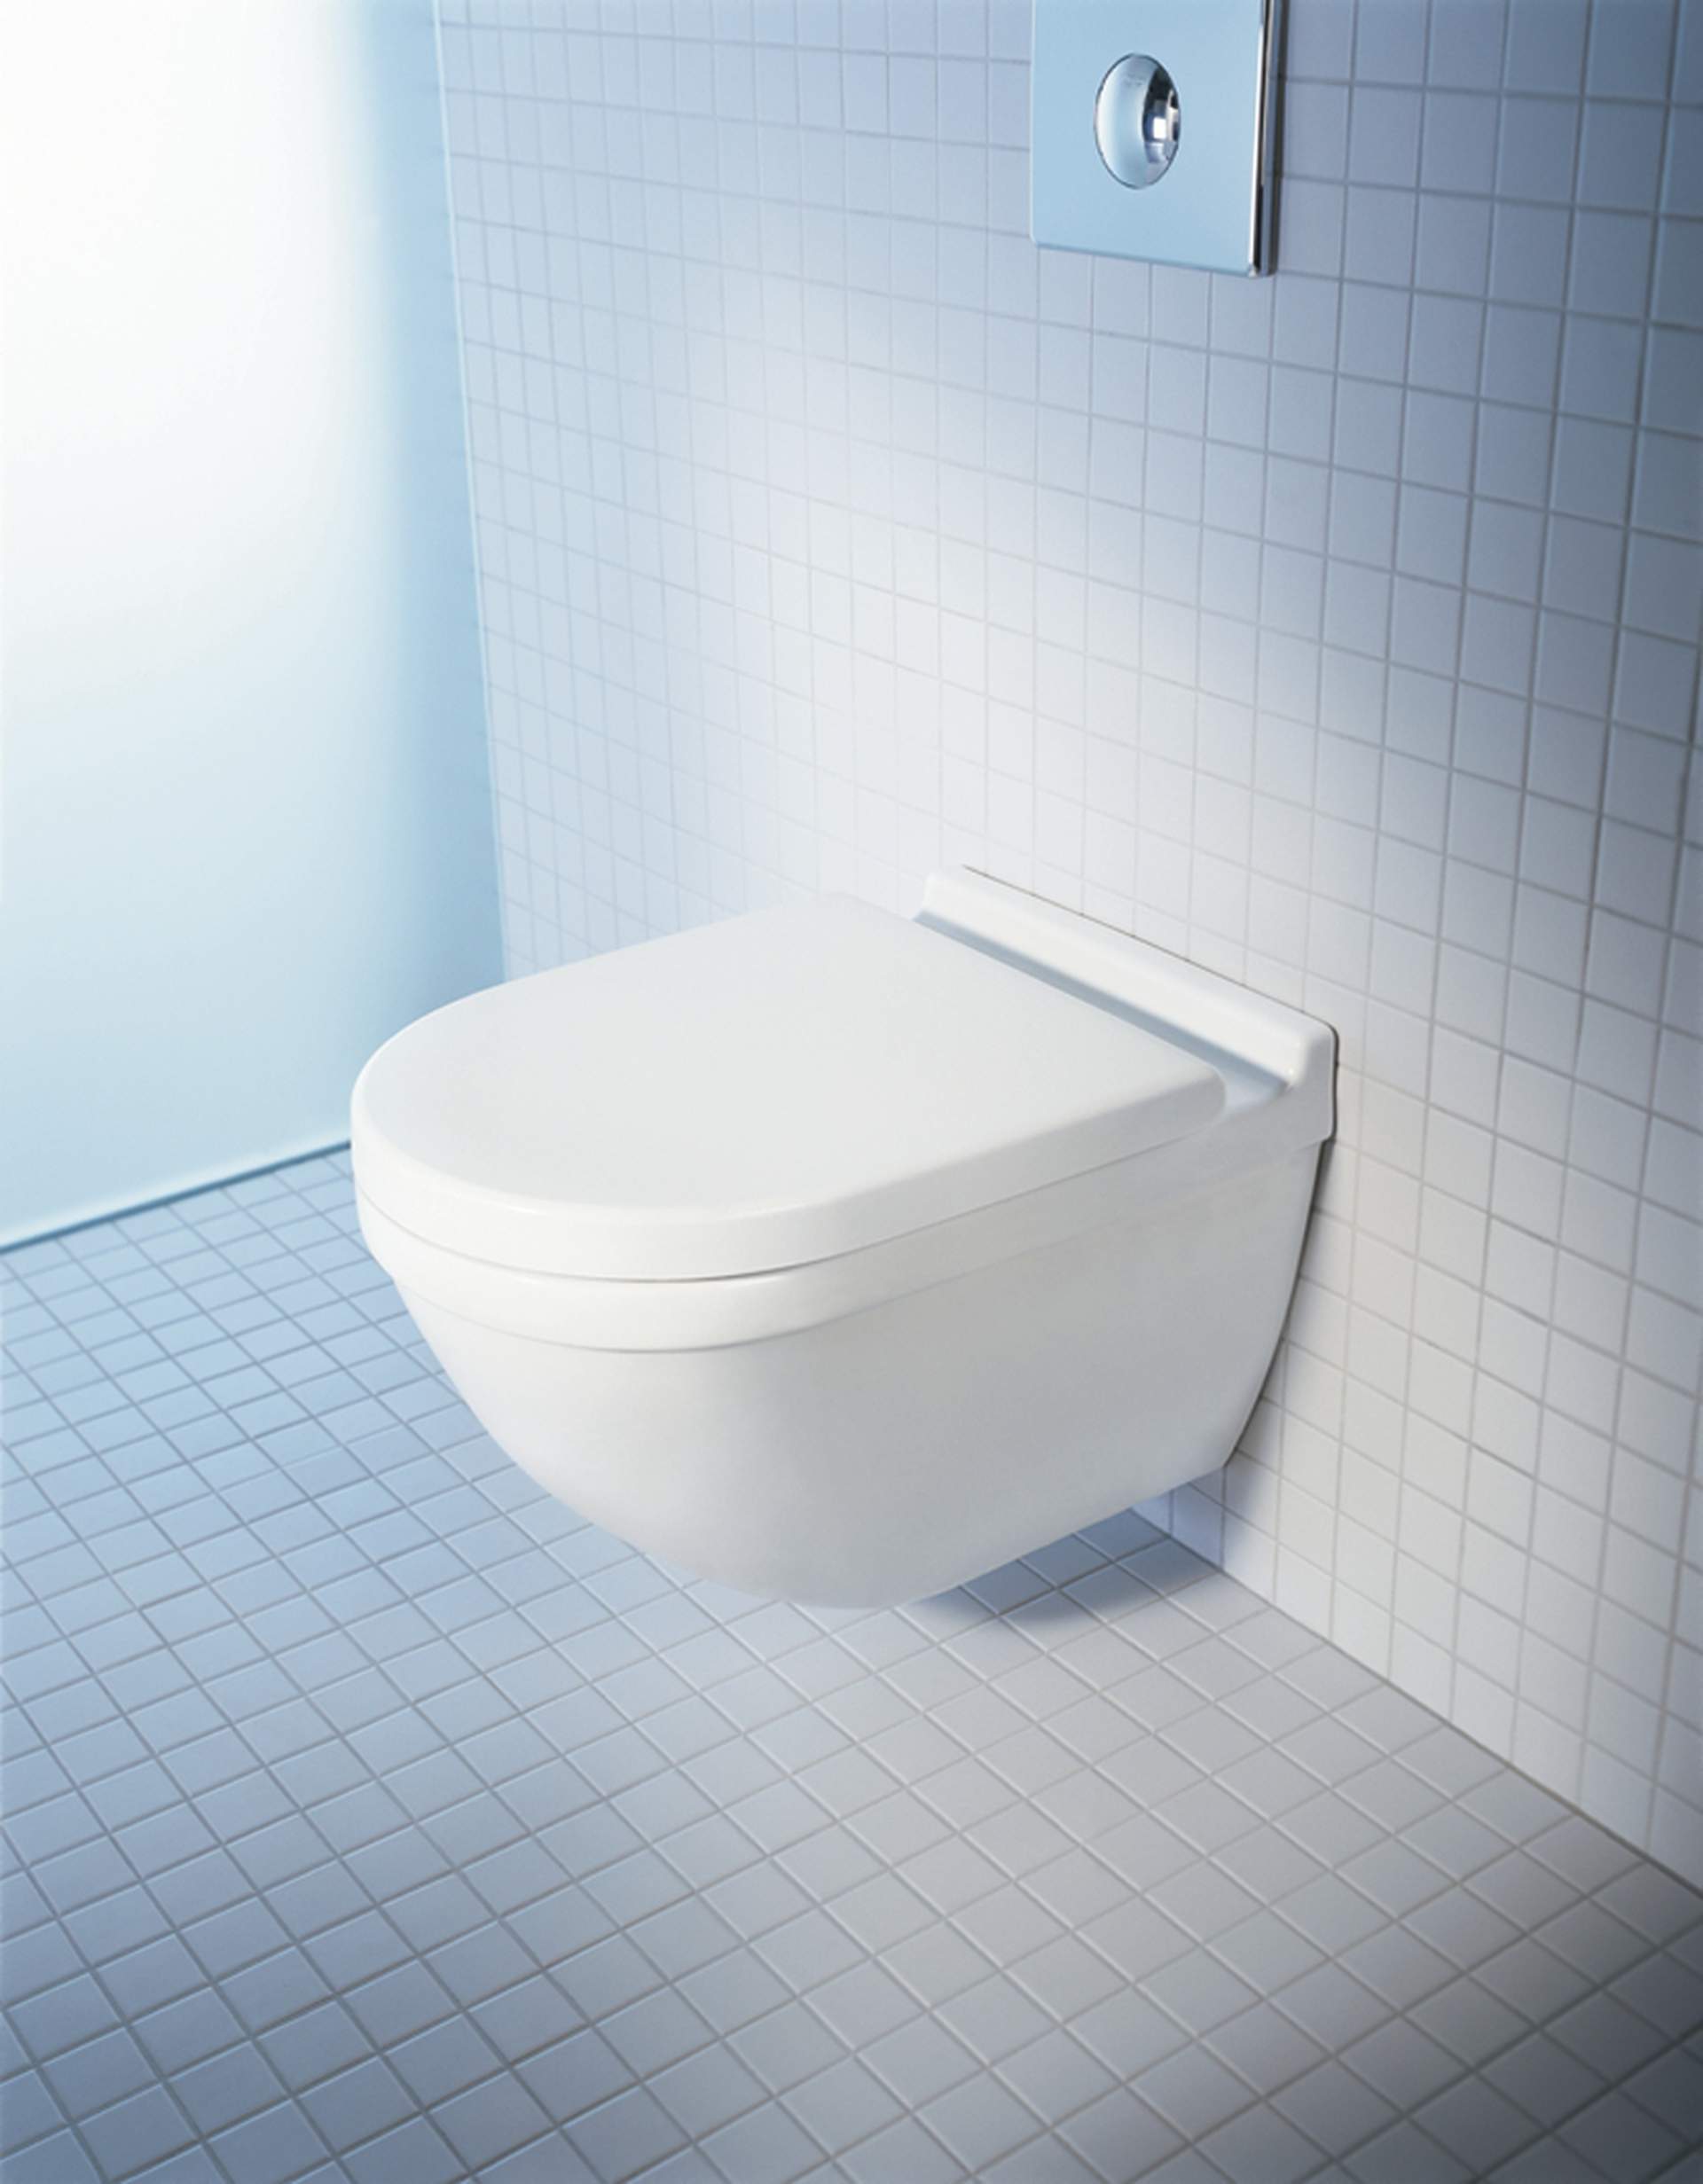 Toilet wall-mounted, 222609